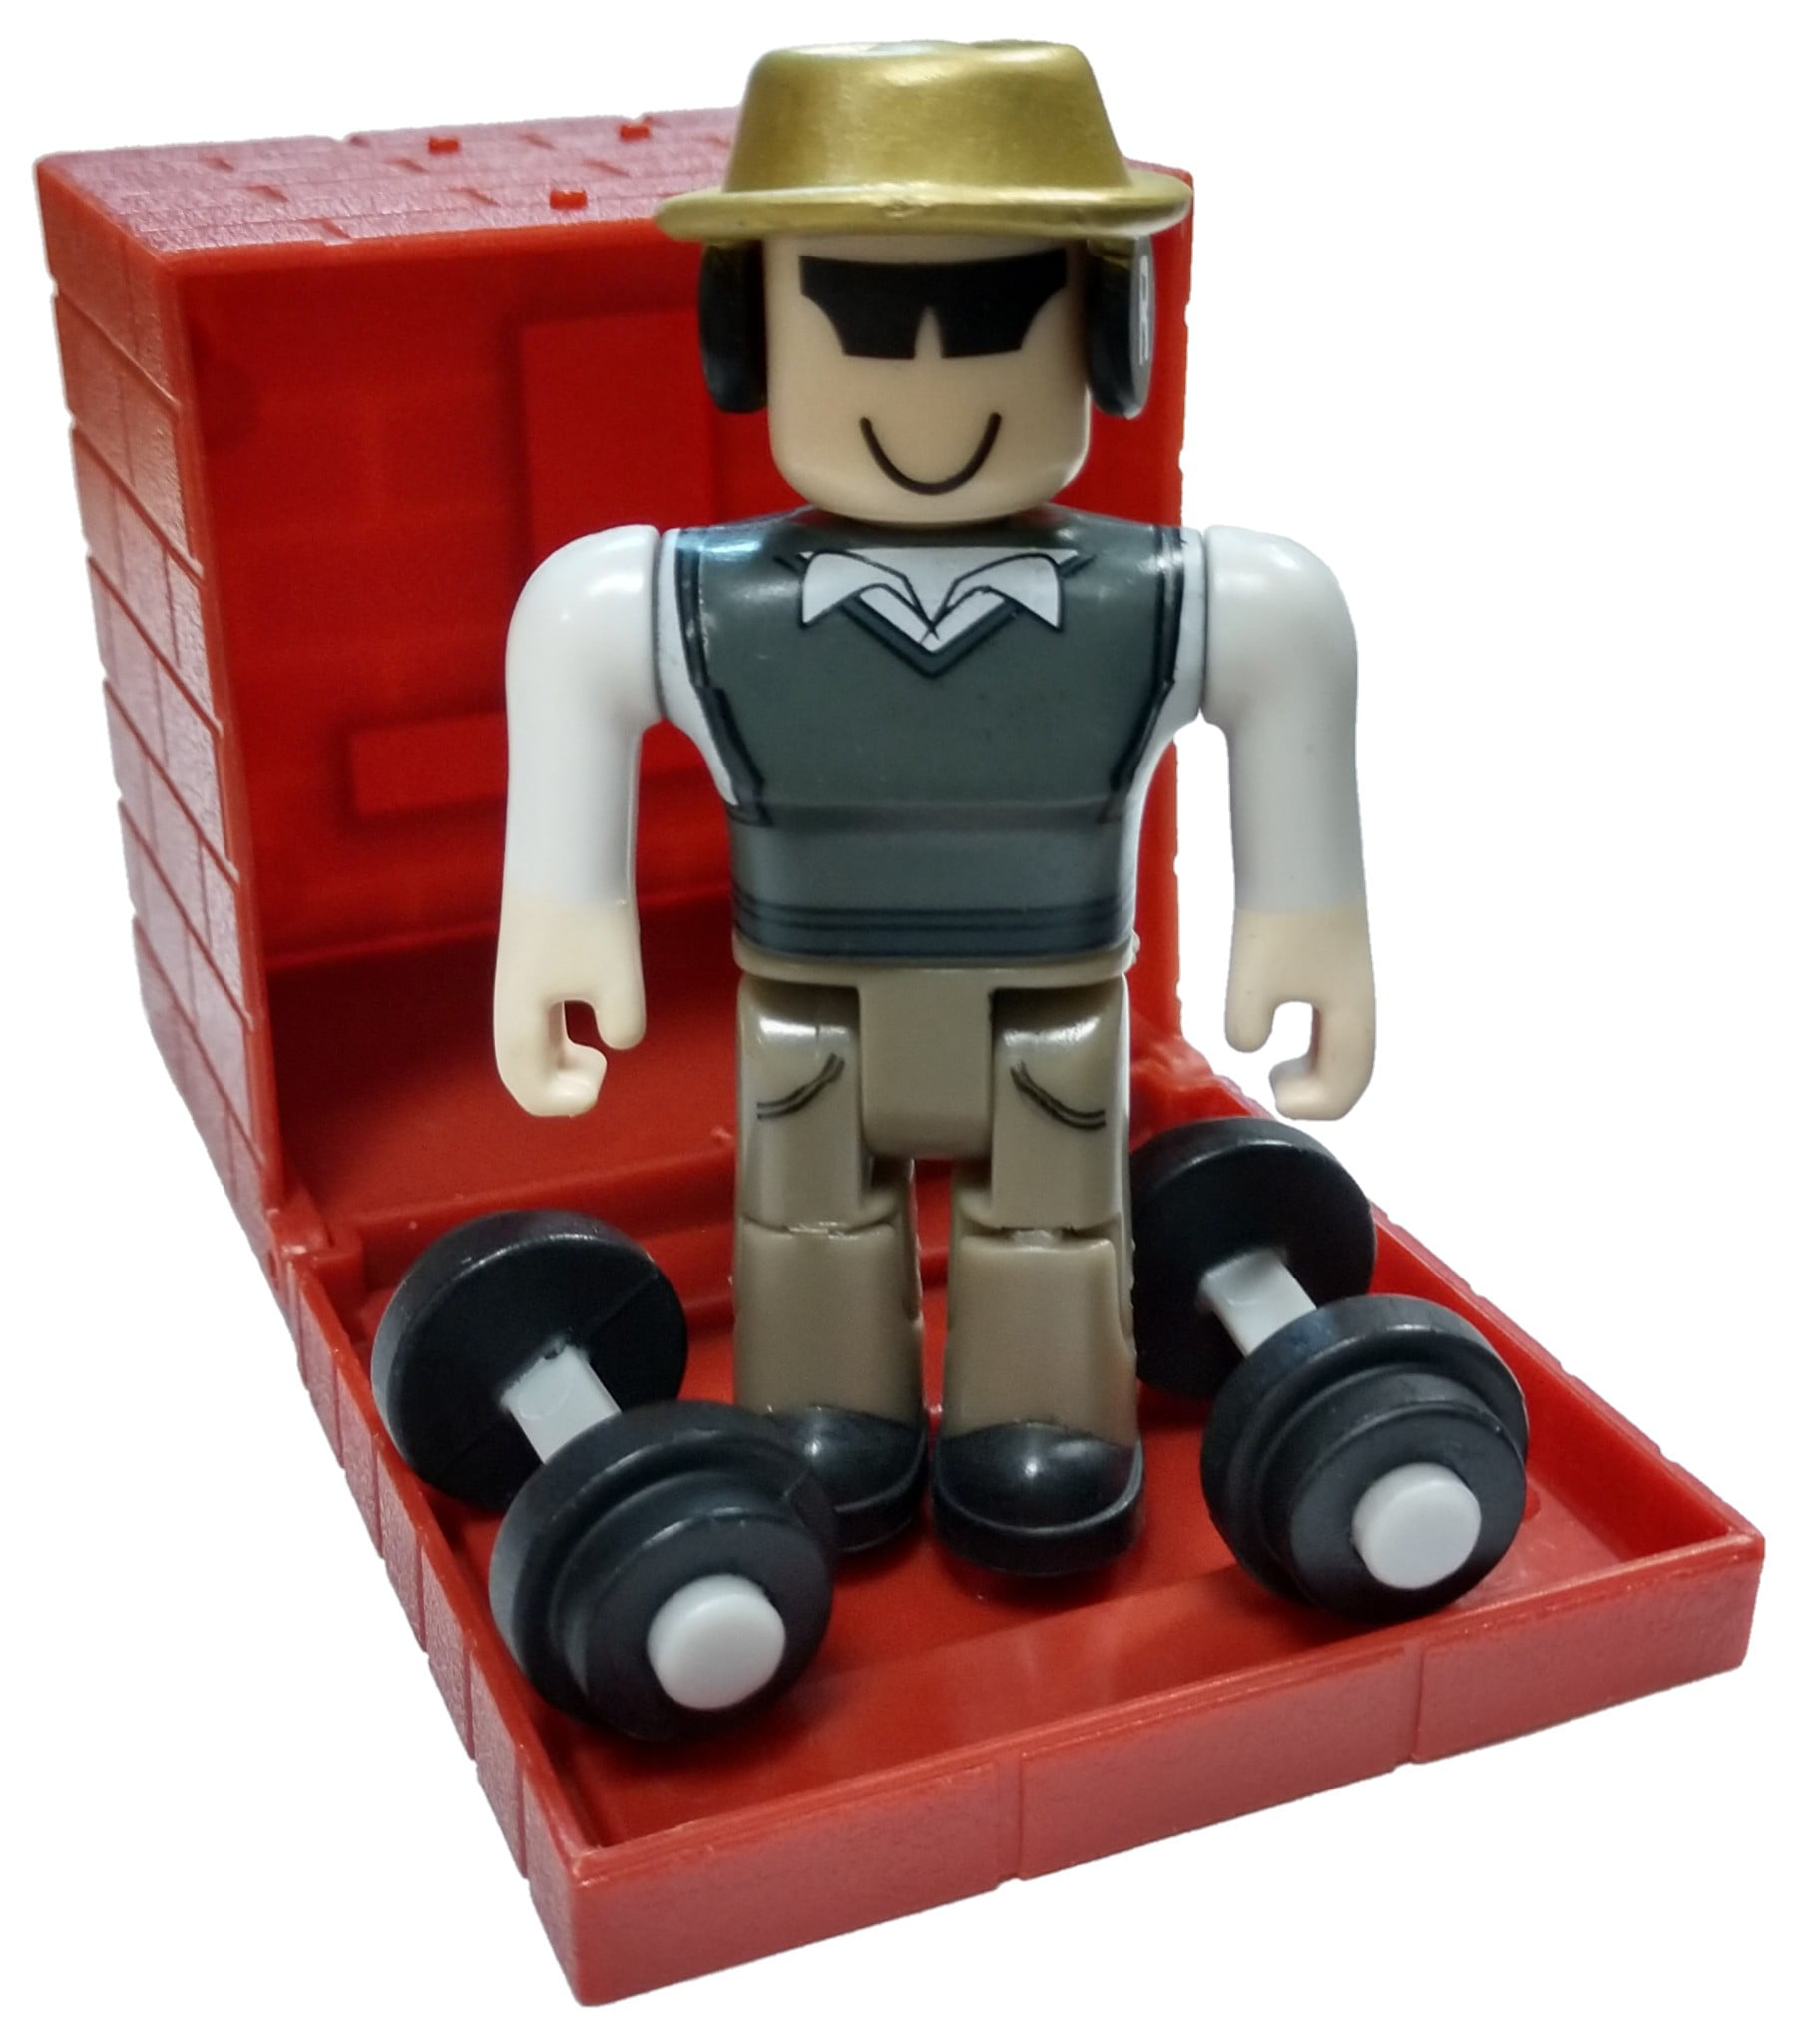 Roblox Red Series 4 Badcc Mini Figure With Red Cube And Online Code No Packaging Walmart Com Walmart Com - details about roblox red series 4 wishz mini figure with red cube and online code loose